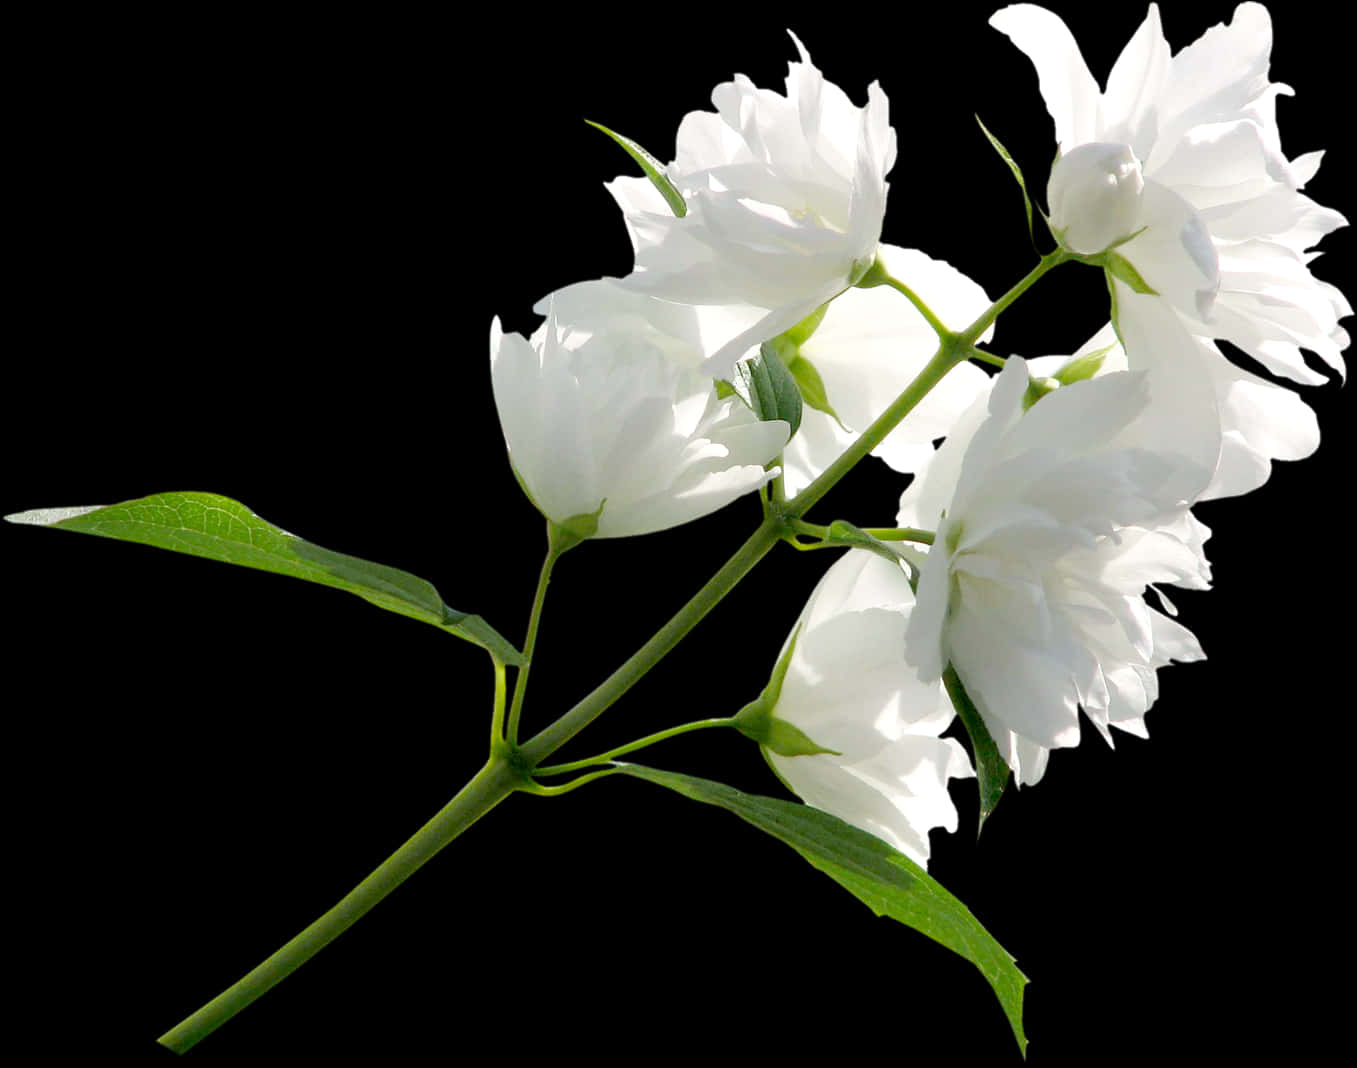 A White Flowers On A Stem